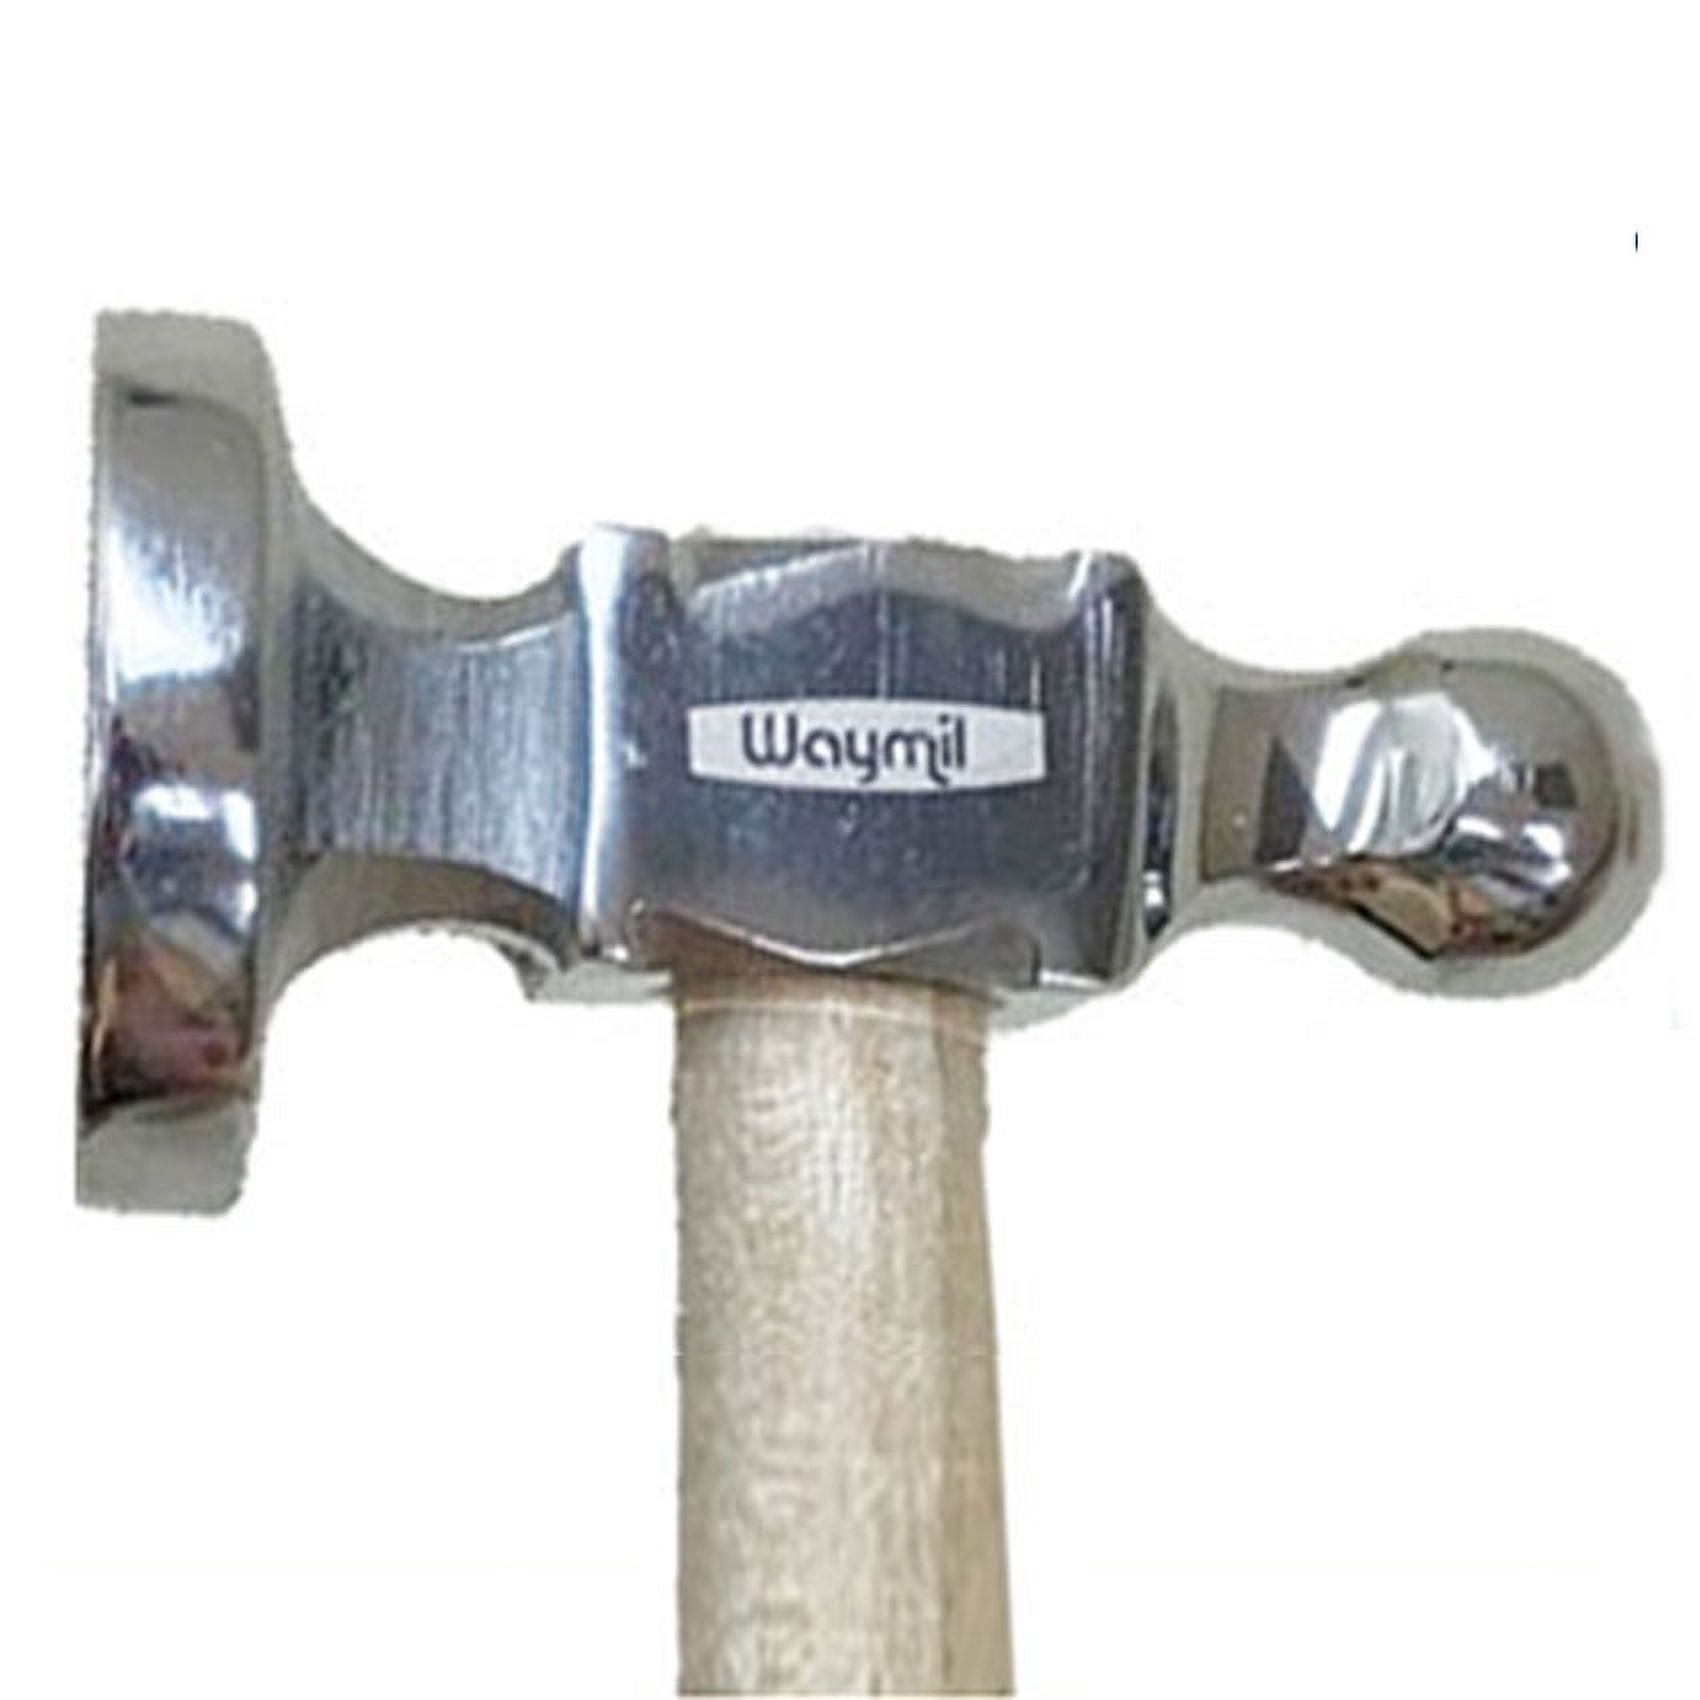 Chasing Hammer Jewelry Hobby Silversmiths Premium Flat Face Hammers